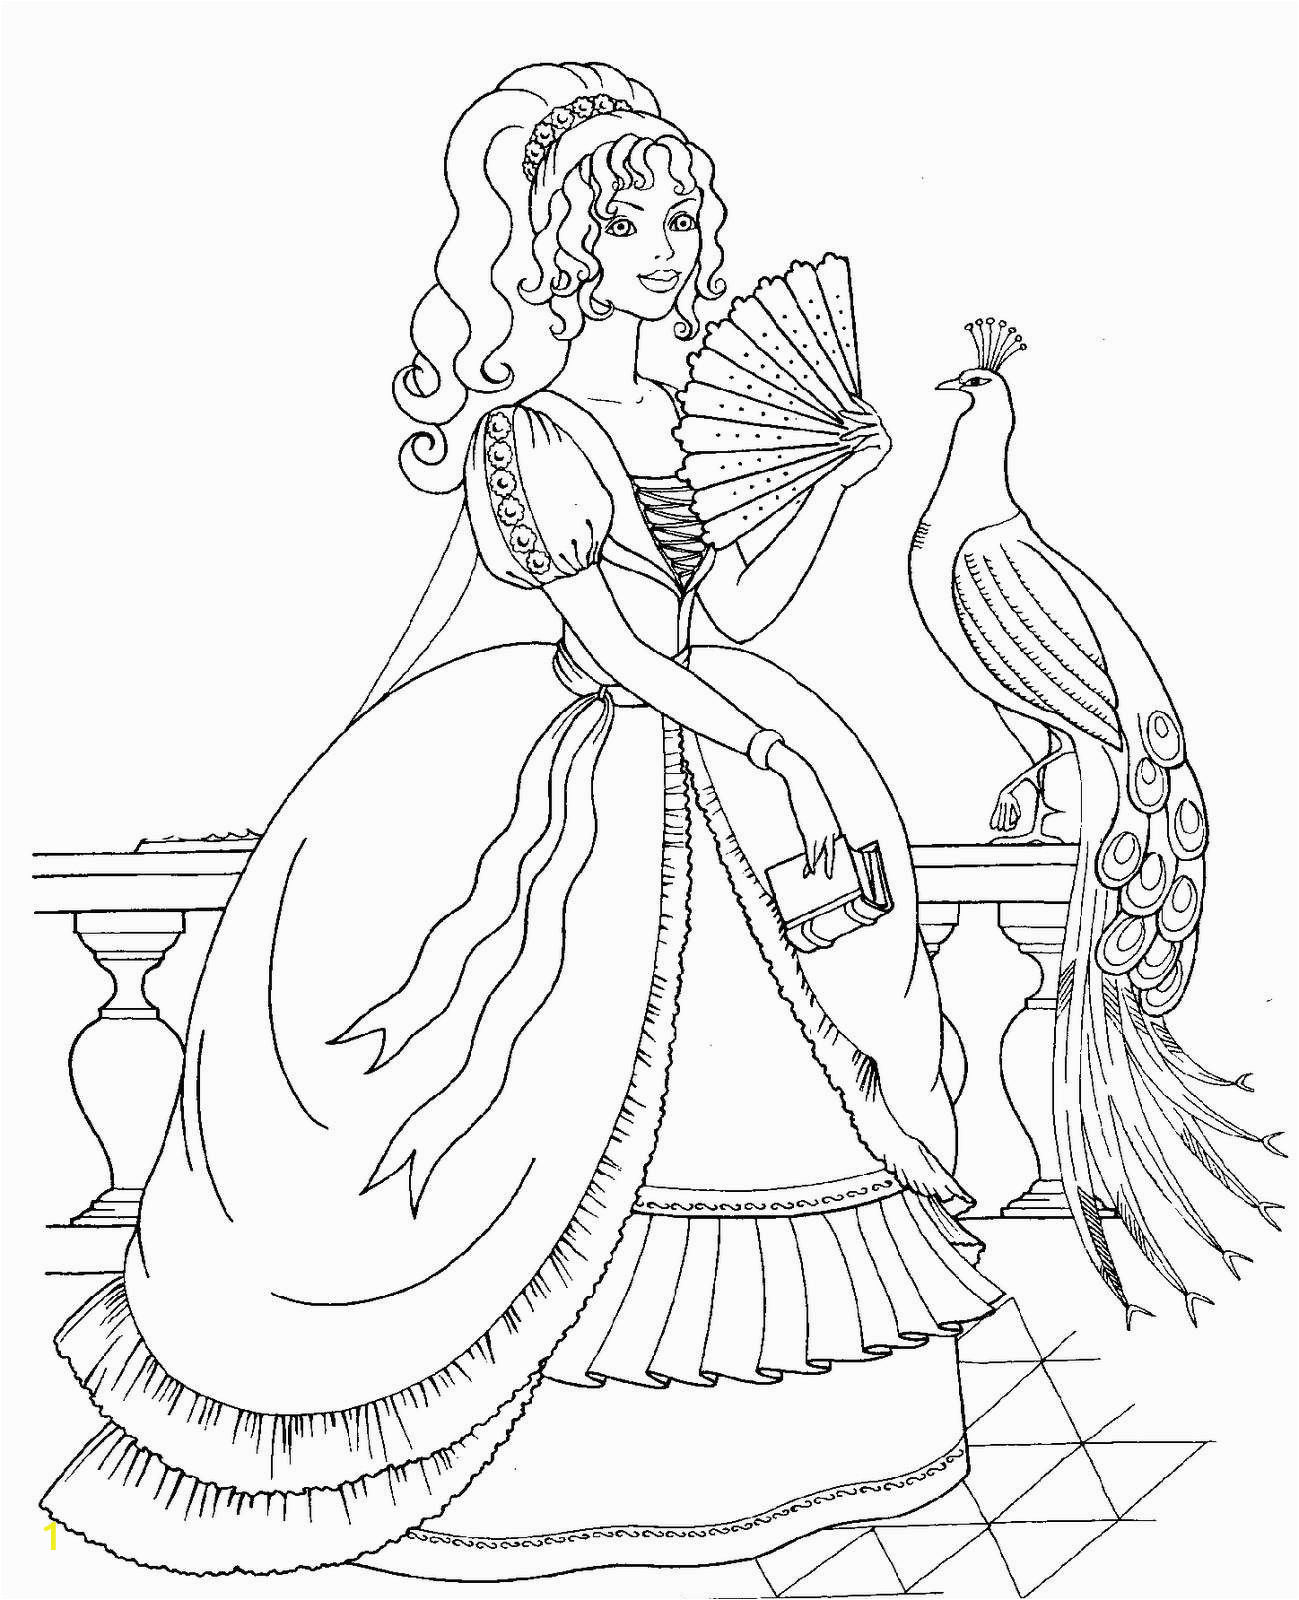 Lego Disney Princess Coloring Pages Disney Princess Full Size Coloring Pages with Images